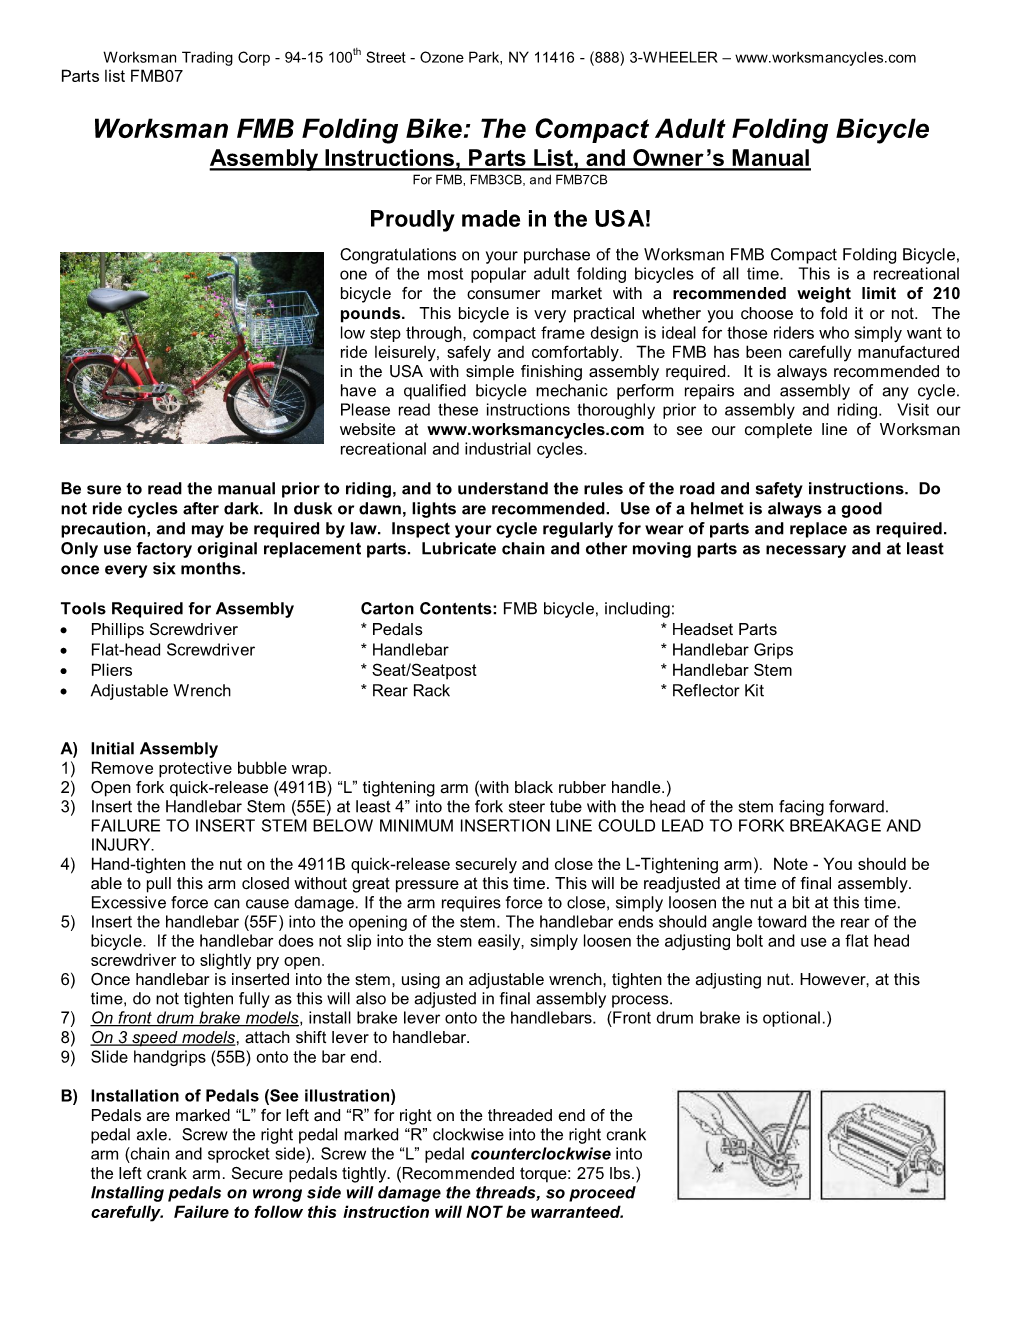 Worksman FMB Folding Bike: the Compact Adult Folding Bicycle Assembly Instructions, Parts List, and Owner’S Manual for FMB, FMB3CB, and FMB7CB